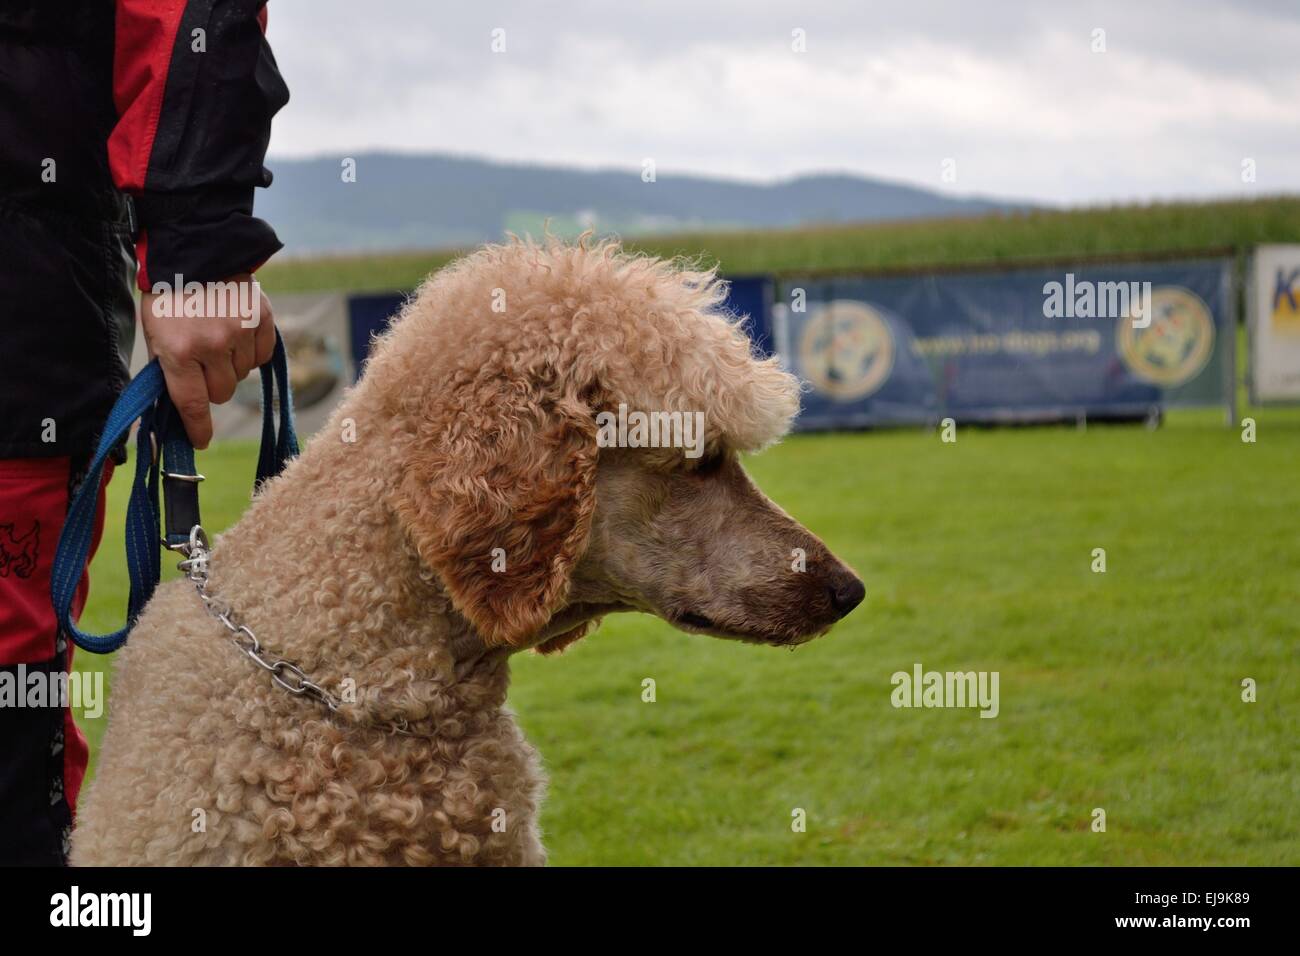 Poodle on leash at dog owners Stock Photo